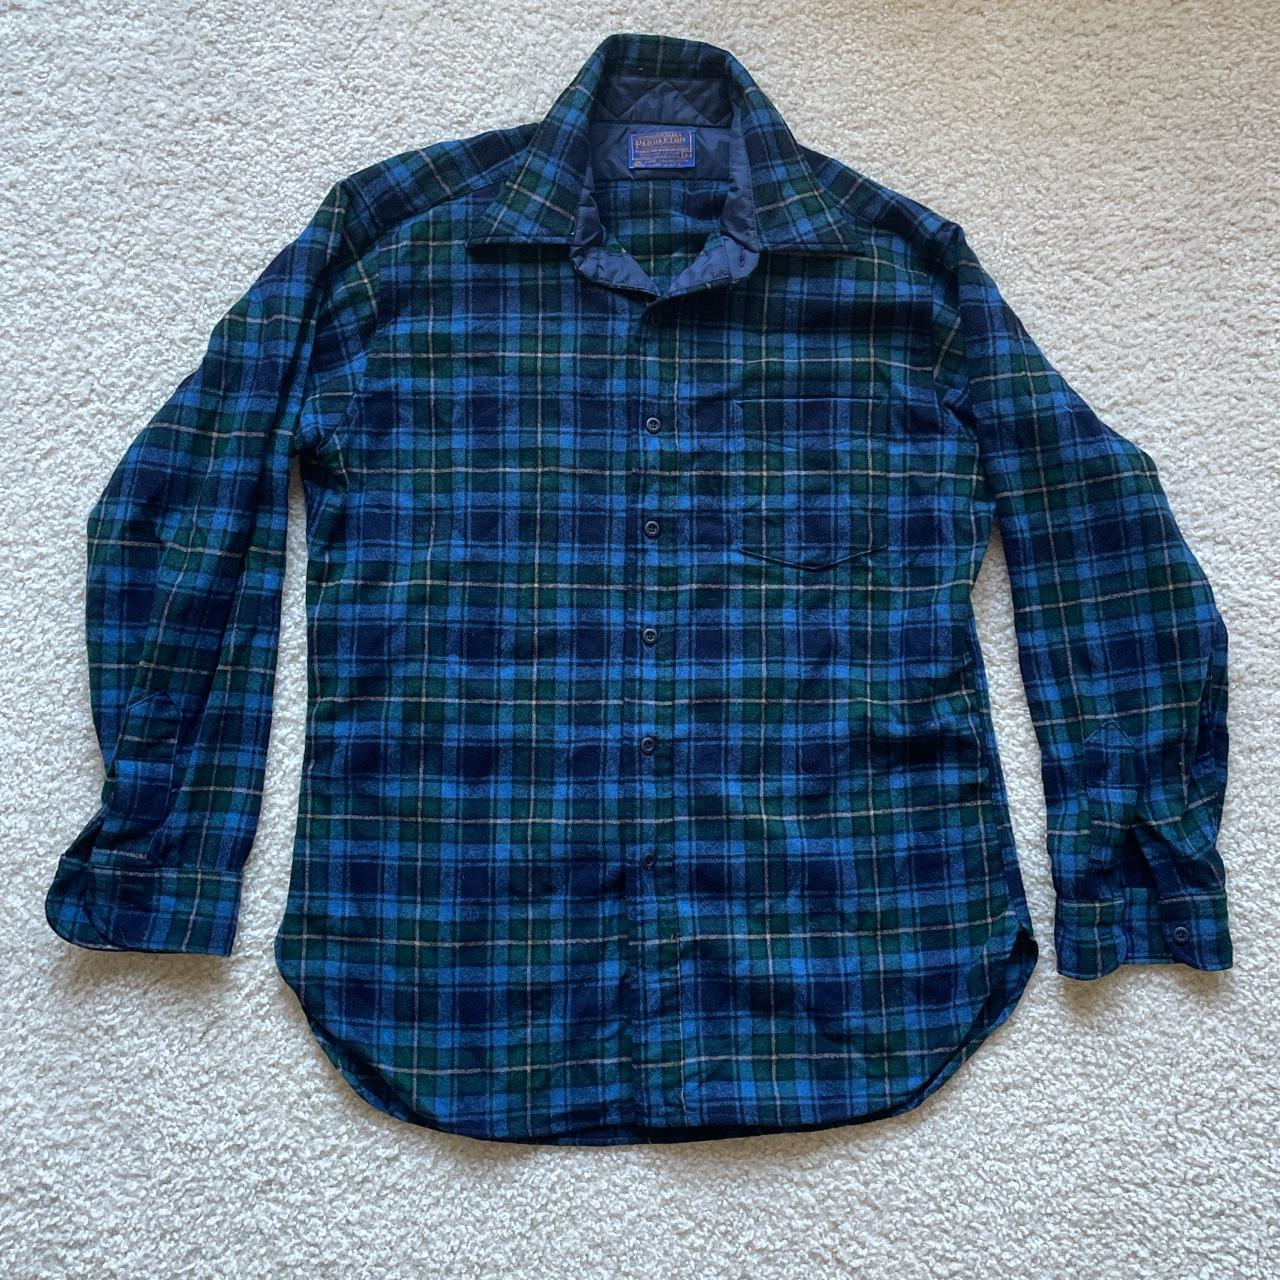 Product Image 1 - 70s pendleton flannel
SIZE L
🚨FREE SHIPPING🚨
✉️feel